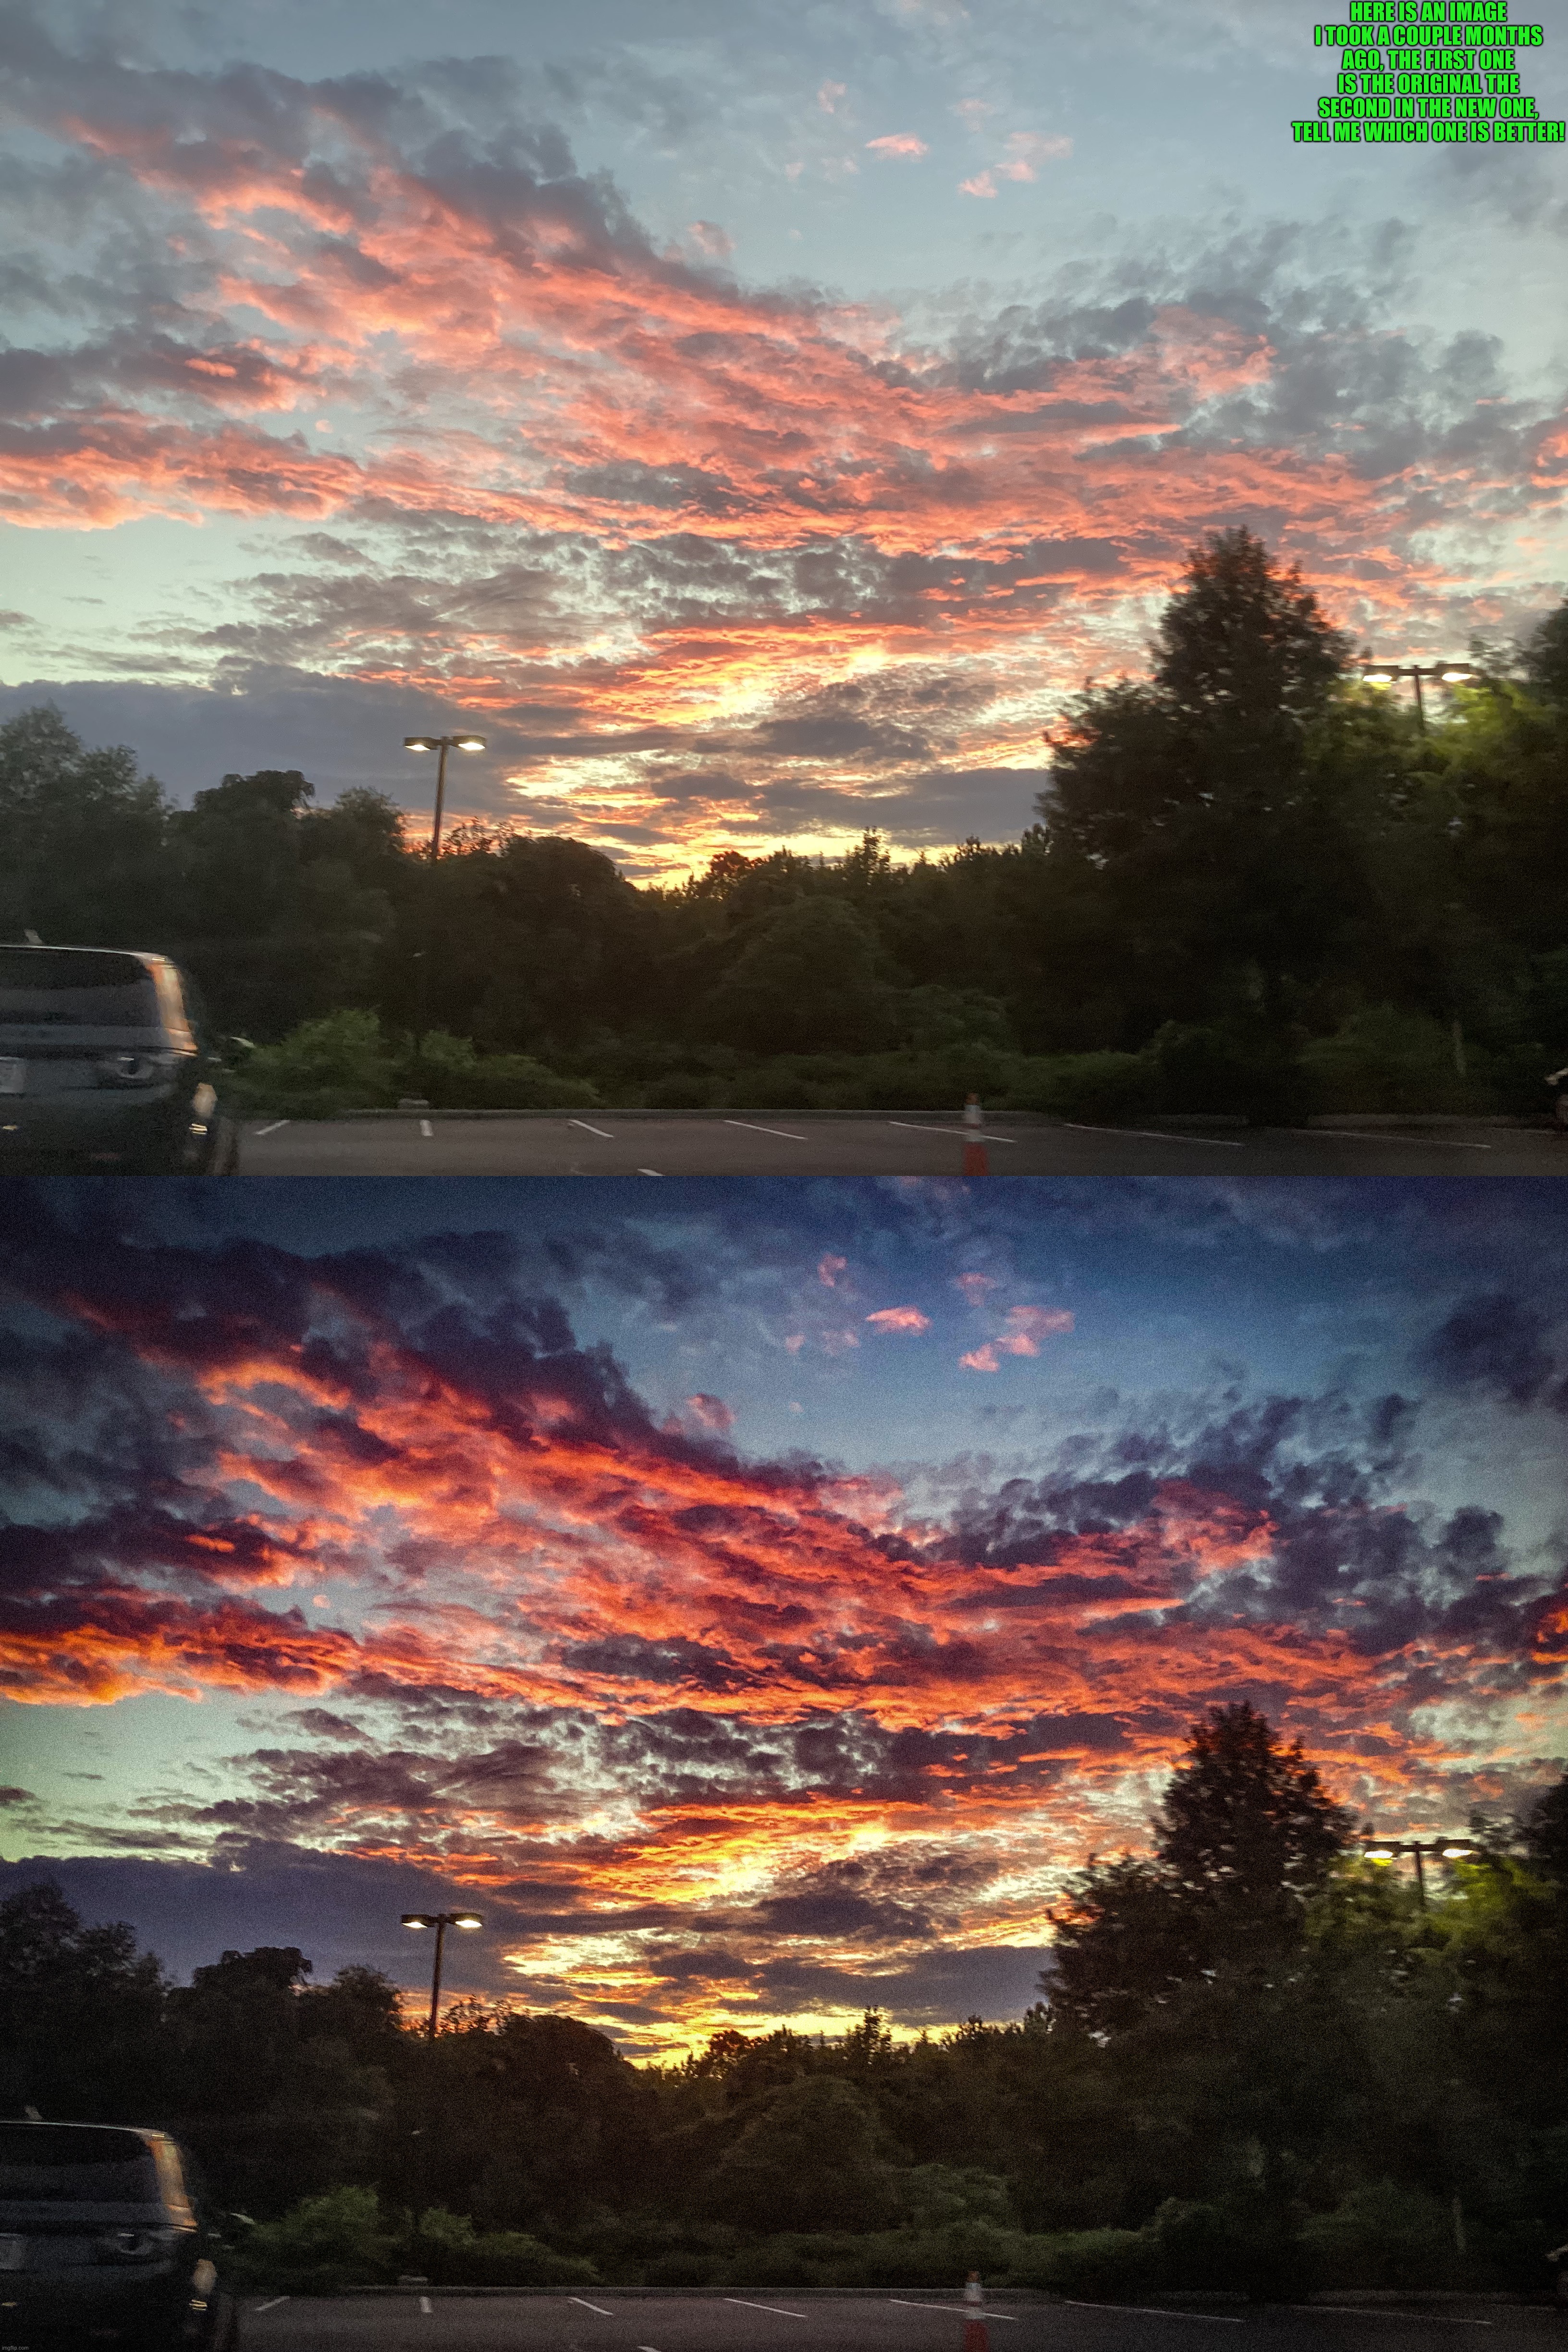 Which is better? Original or edited? | HERE IS AN IMAGE I TOOK A COUPLE MONTHS AGO, THE FIRST ONE IS THE ORIGINAL THE SECOND IN THE NEW ONE, TELL ME WHICH ONE IS BETTER! | image tagged in share your own photos | made w/ Imgflip meme maker